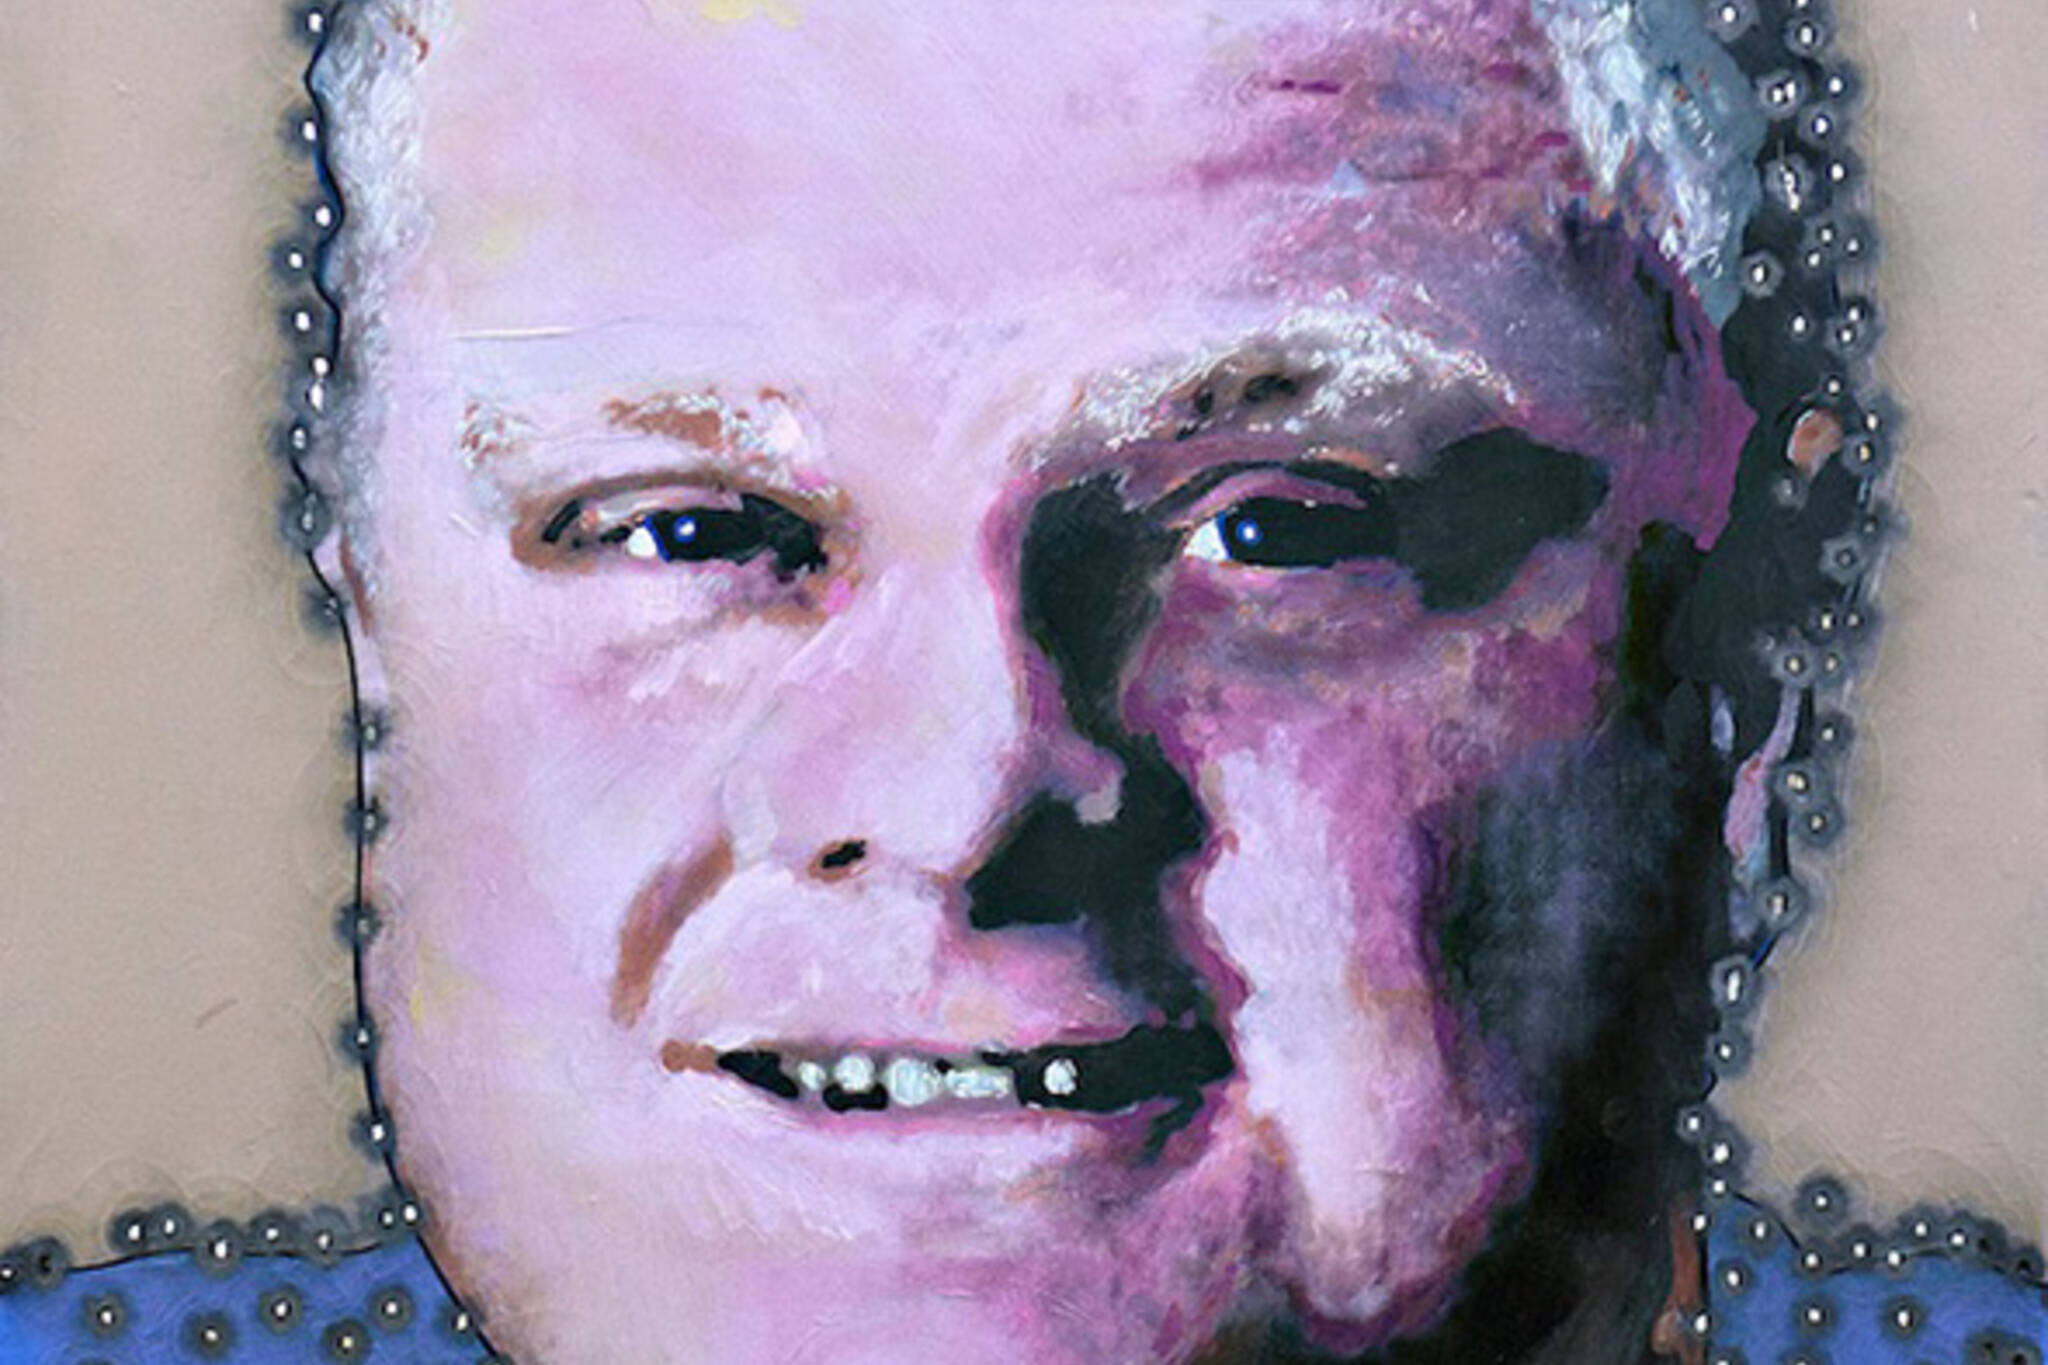 rob ford bullets